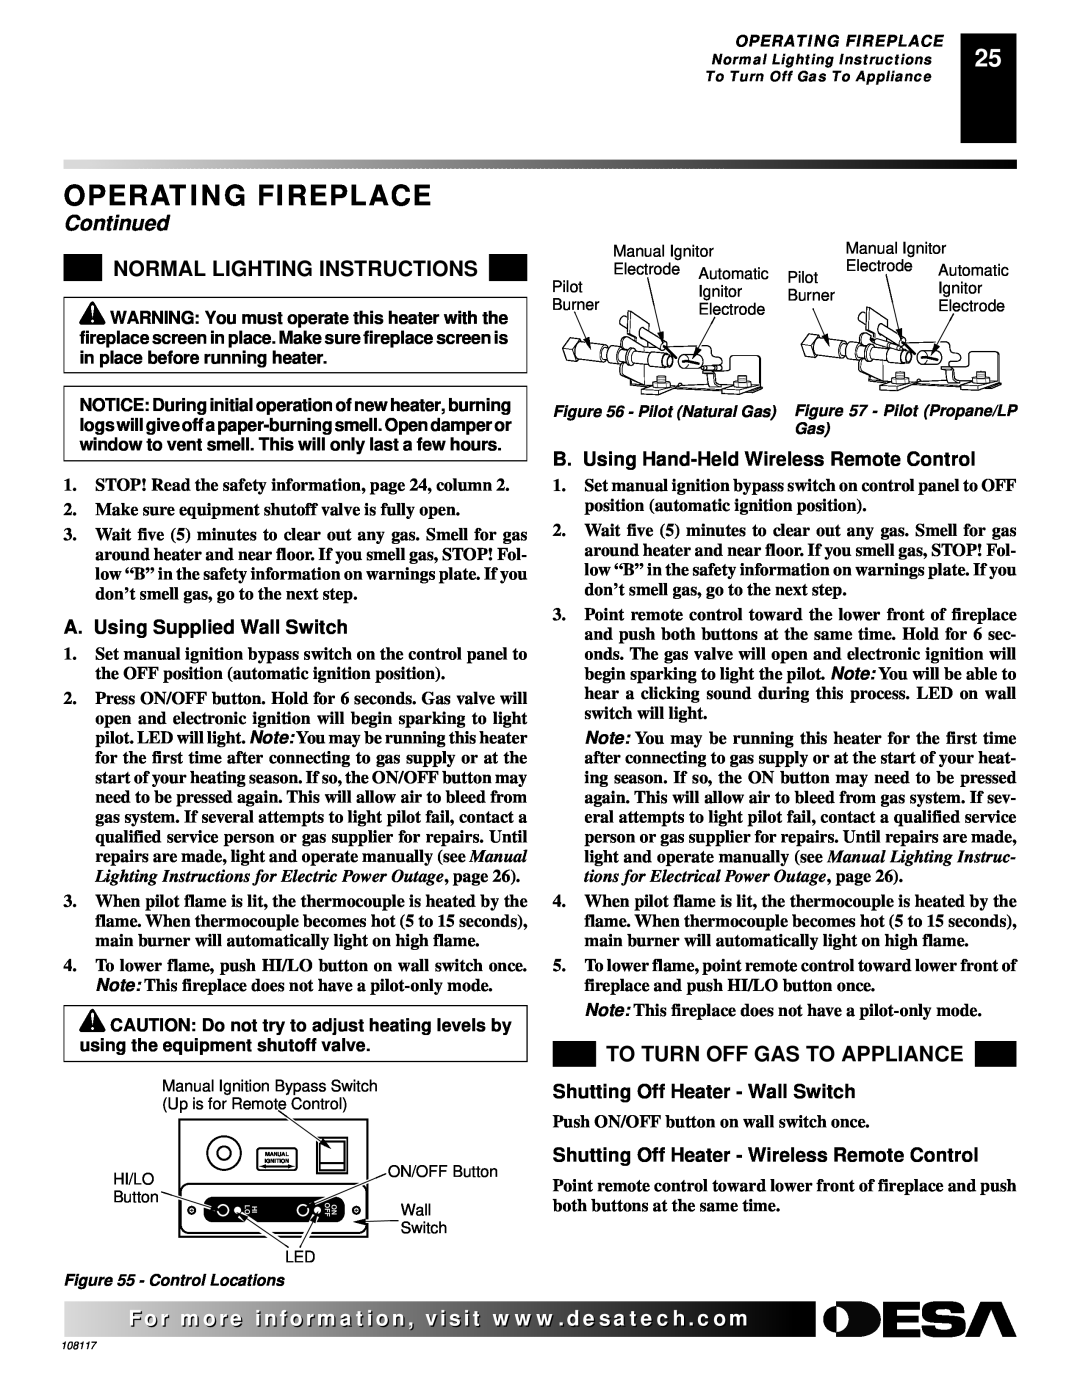 Desa VTGF33PR, VTGF33NR Normal Lighting Instructions, To Turn Off Gas To Appliance, Operating Fireplace, Continued 